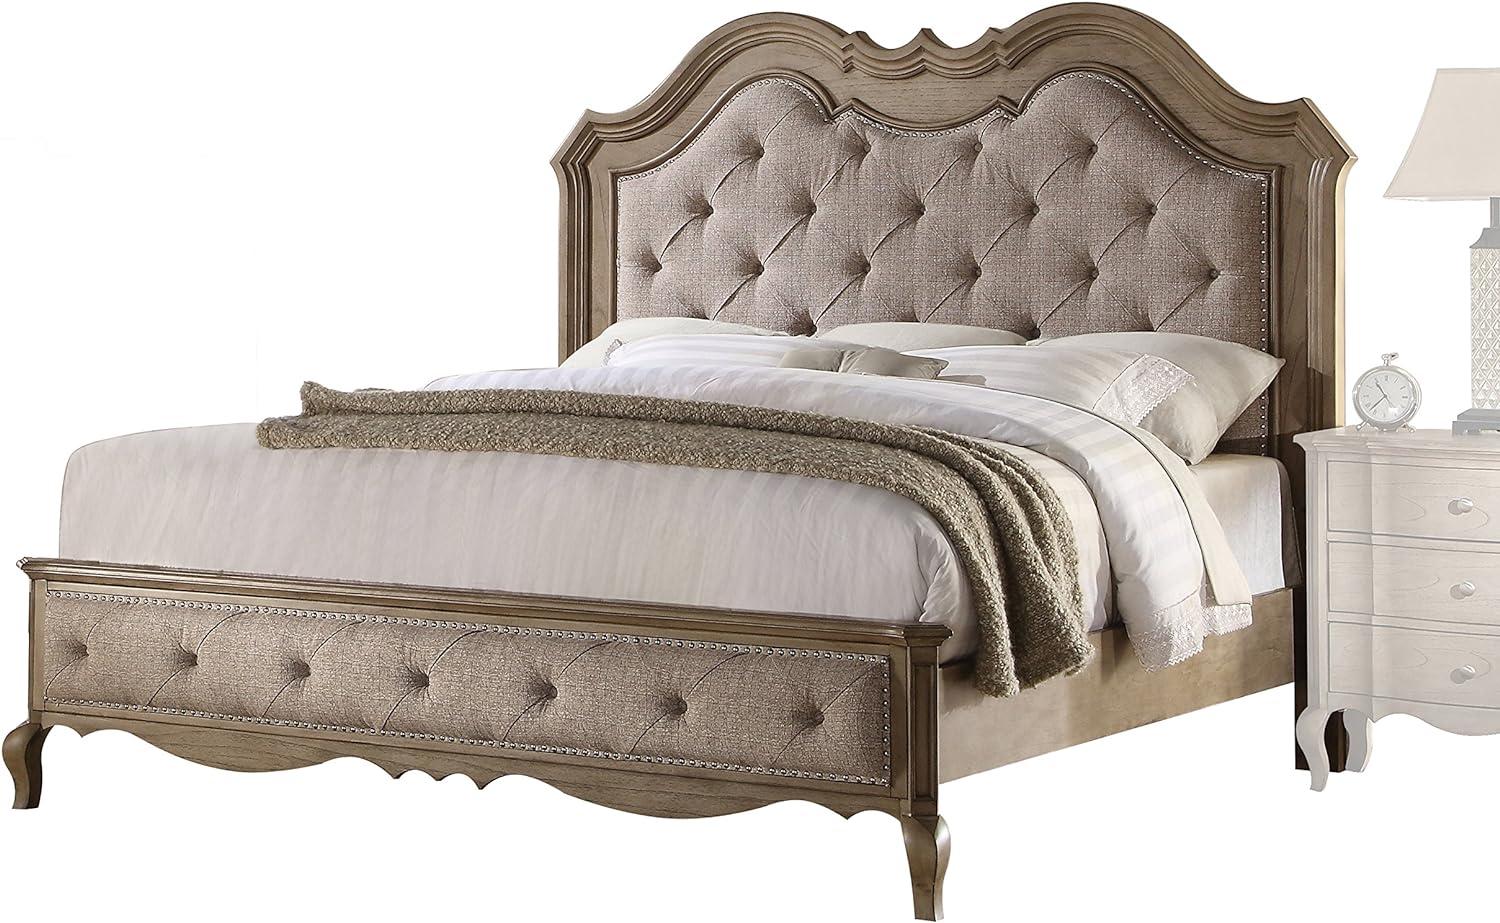 Elegant Beige Fabric Queen Bed with Tufted Nailhead Upholstery